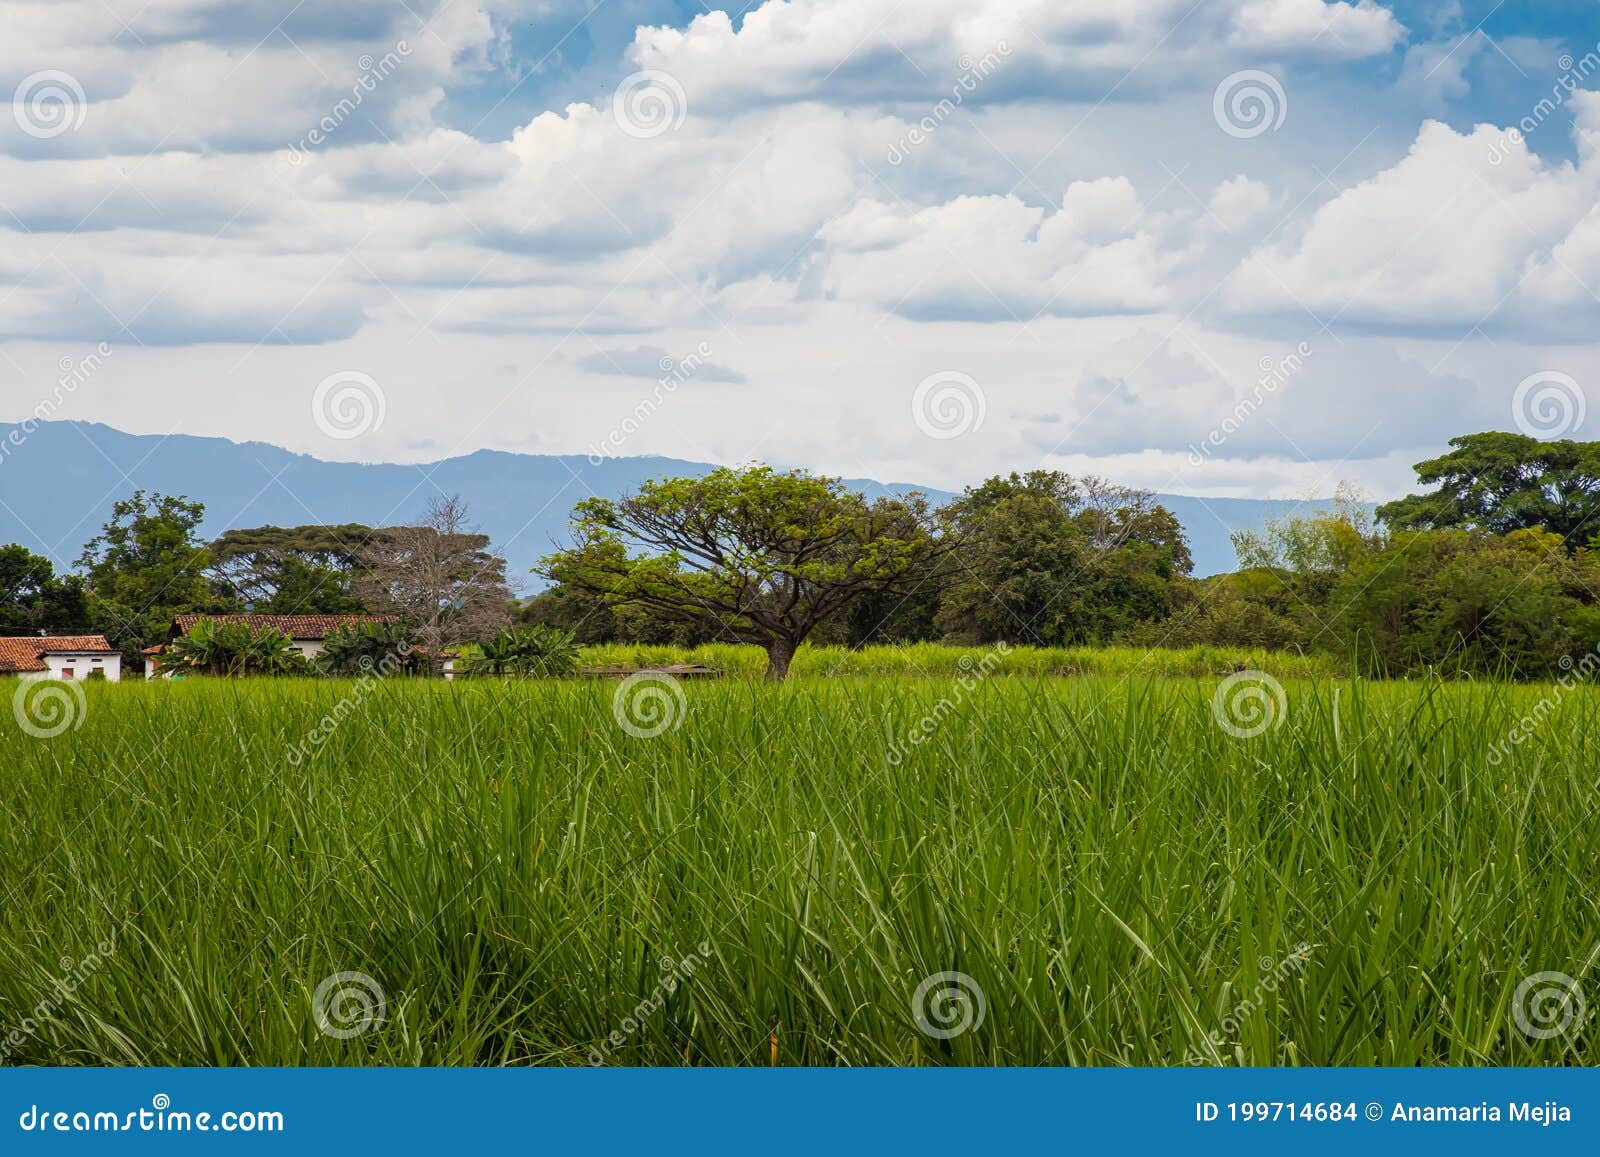 beautiful landscapes with sugar cane fields and the paramo de las hermosas mountains at the valle del cauca region in